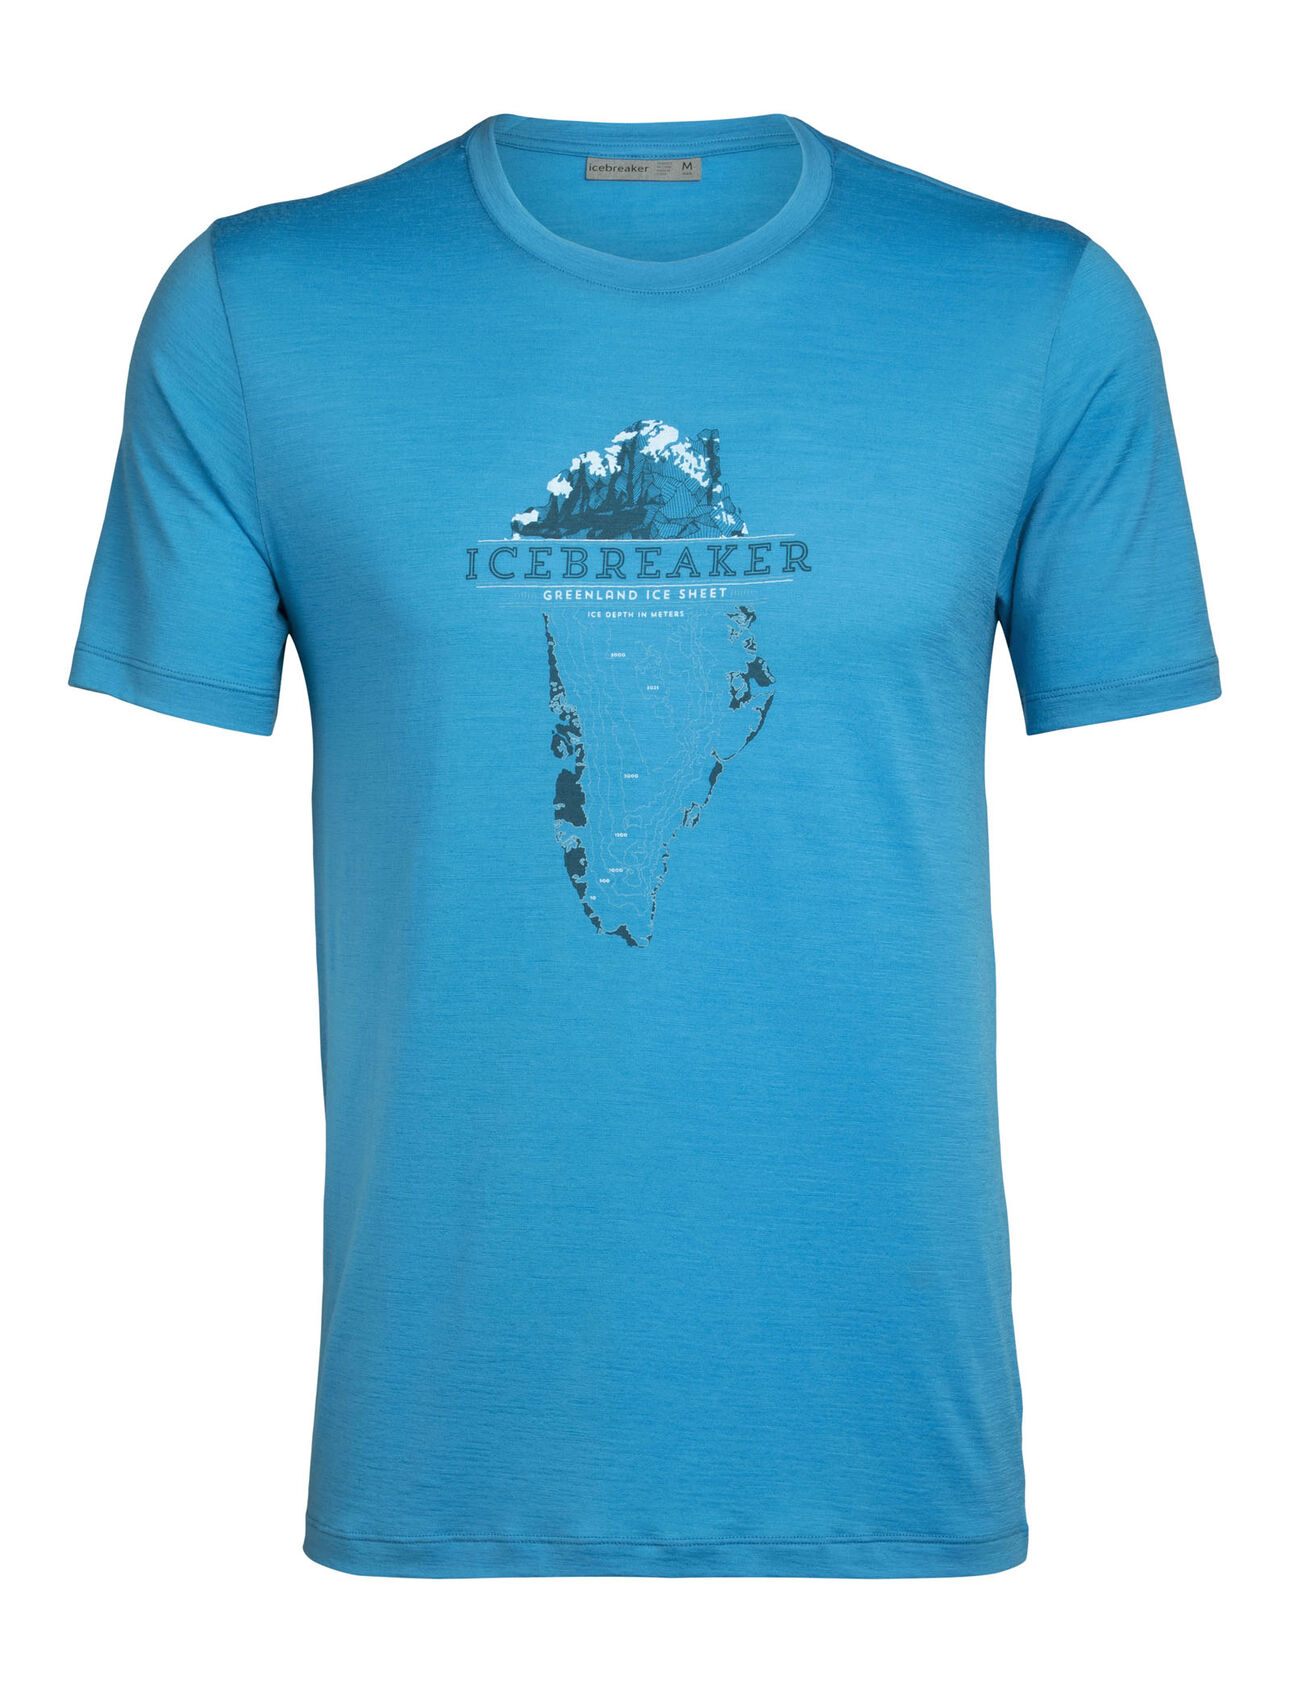 dla mężczyzn Merino Tech Lite Short Sleeve Crewe T-Shirt Greenland Crest Our most versatile tech tee, in breathable, odor-resistant merino wool with a slight stretch. Artist Scott Elser captures the depth of Greenland’s ice sheet, which covers 80% of Greenland and accounts for 8% of Earth’s fresh water.  